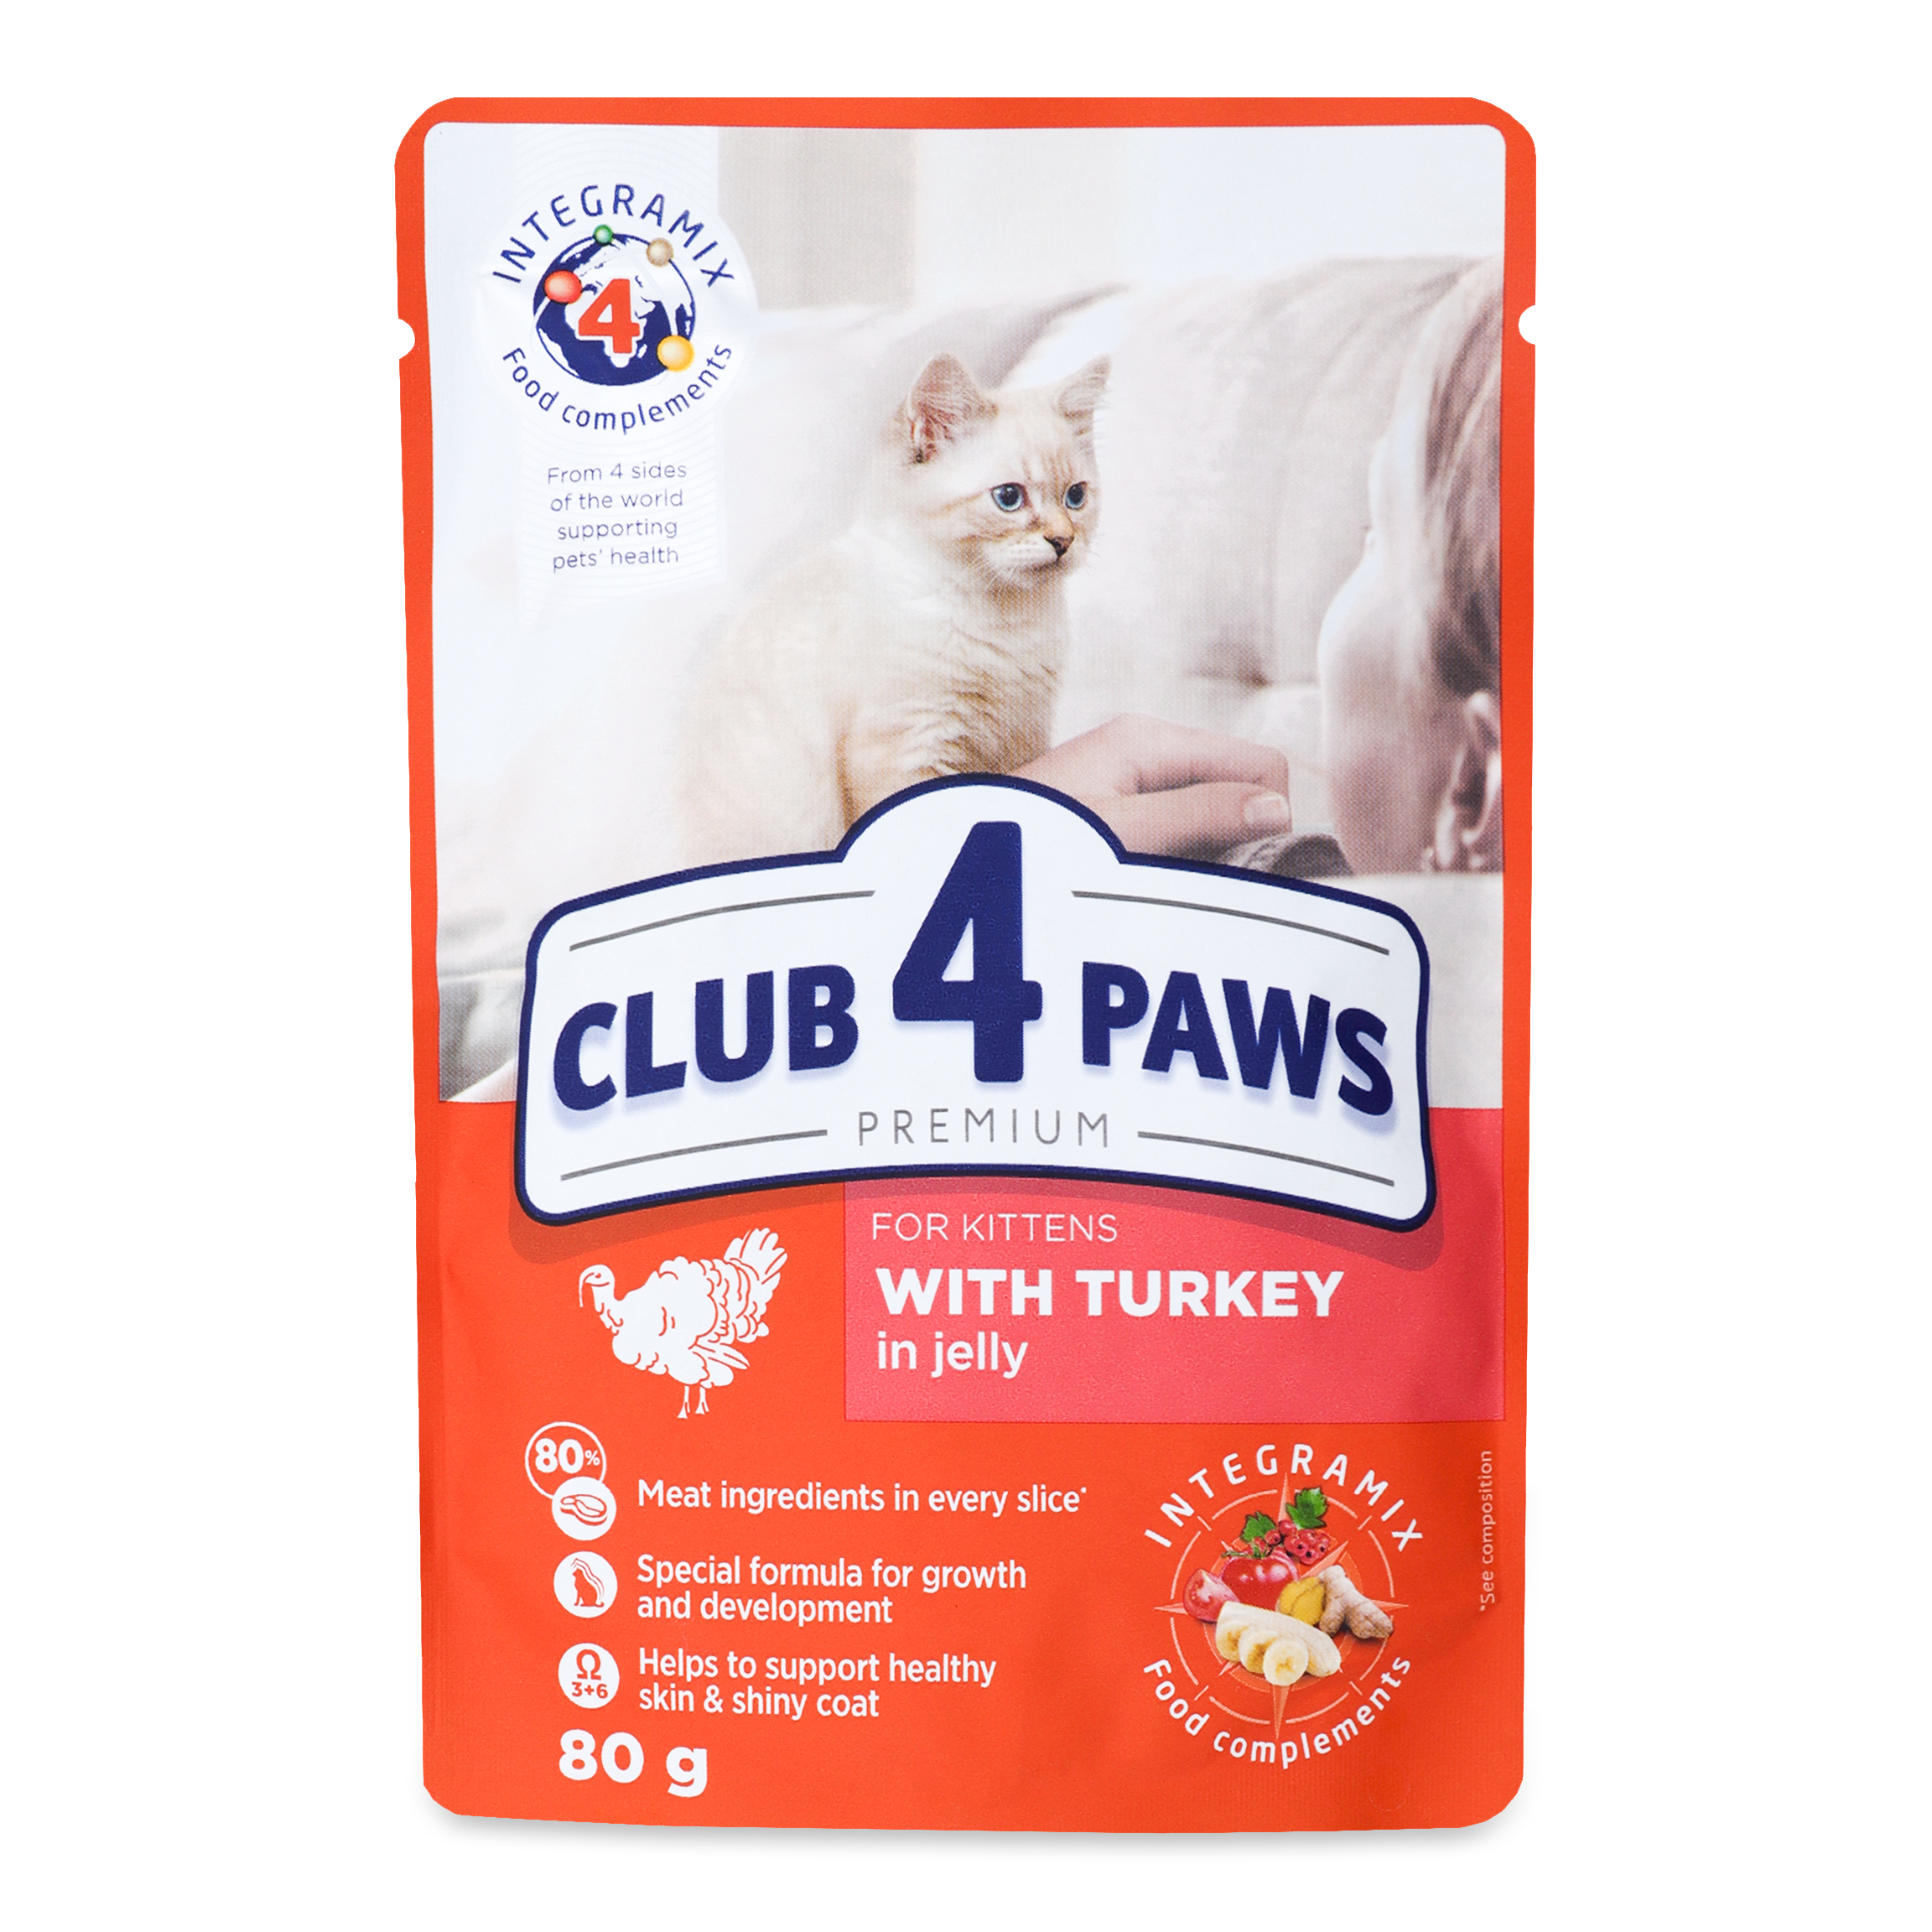 Club 4 Paws Premium with Turkey in Jelly Canned Food for Kittens 80g